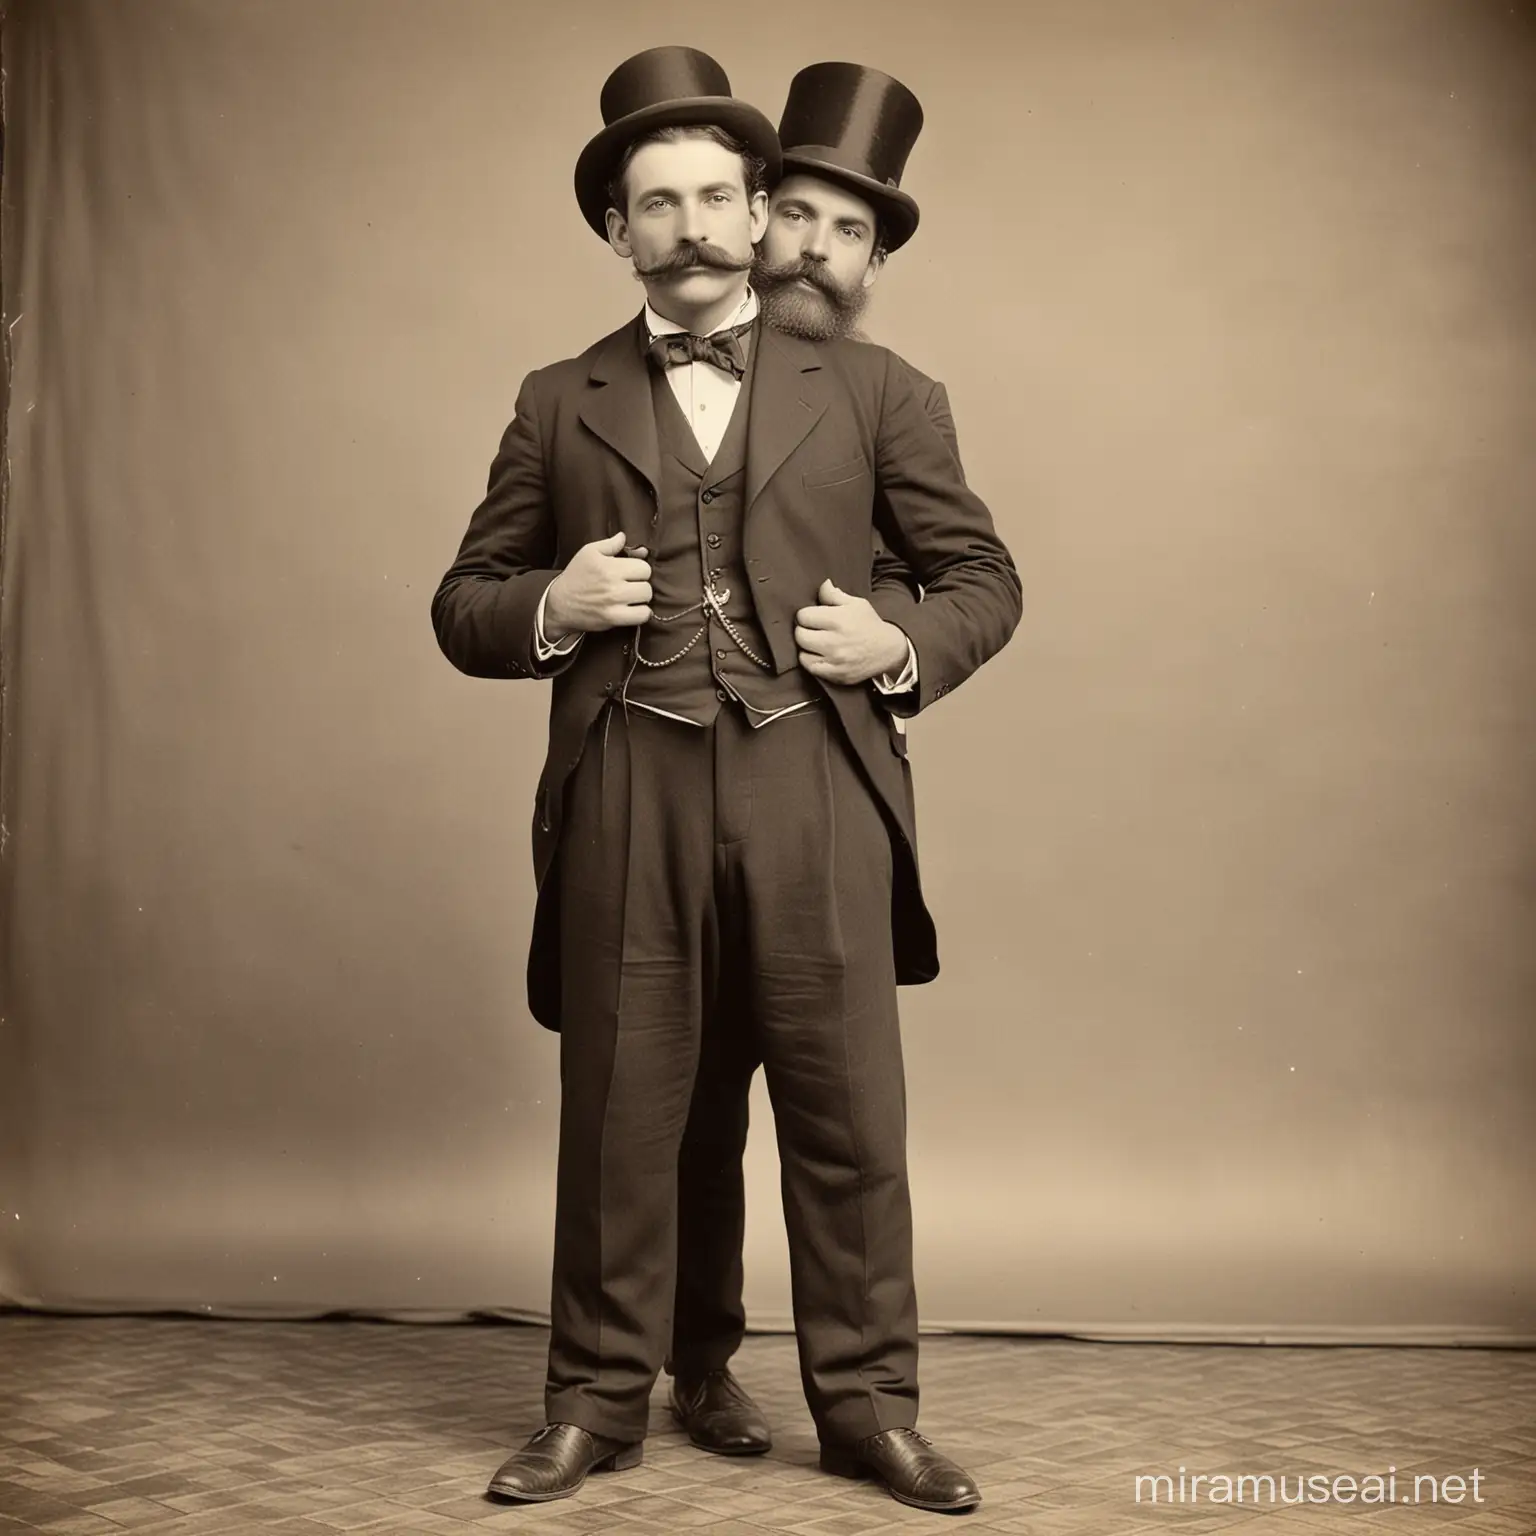 19th century monochrome photo taken in photo studio, full length view of a man with moustache and a bearded man, wearing a suit and a top hat, piggyback